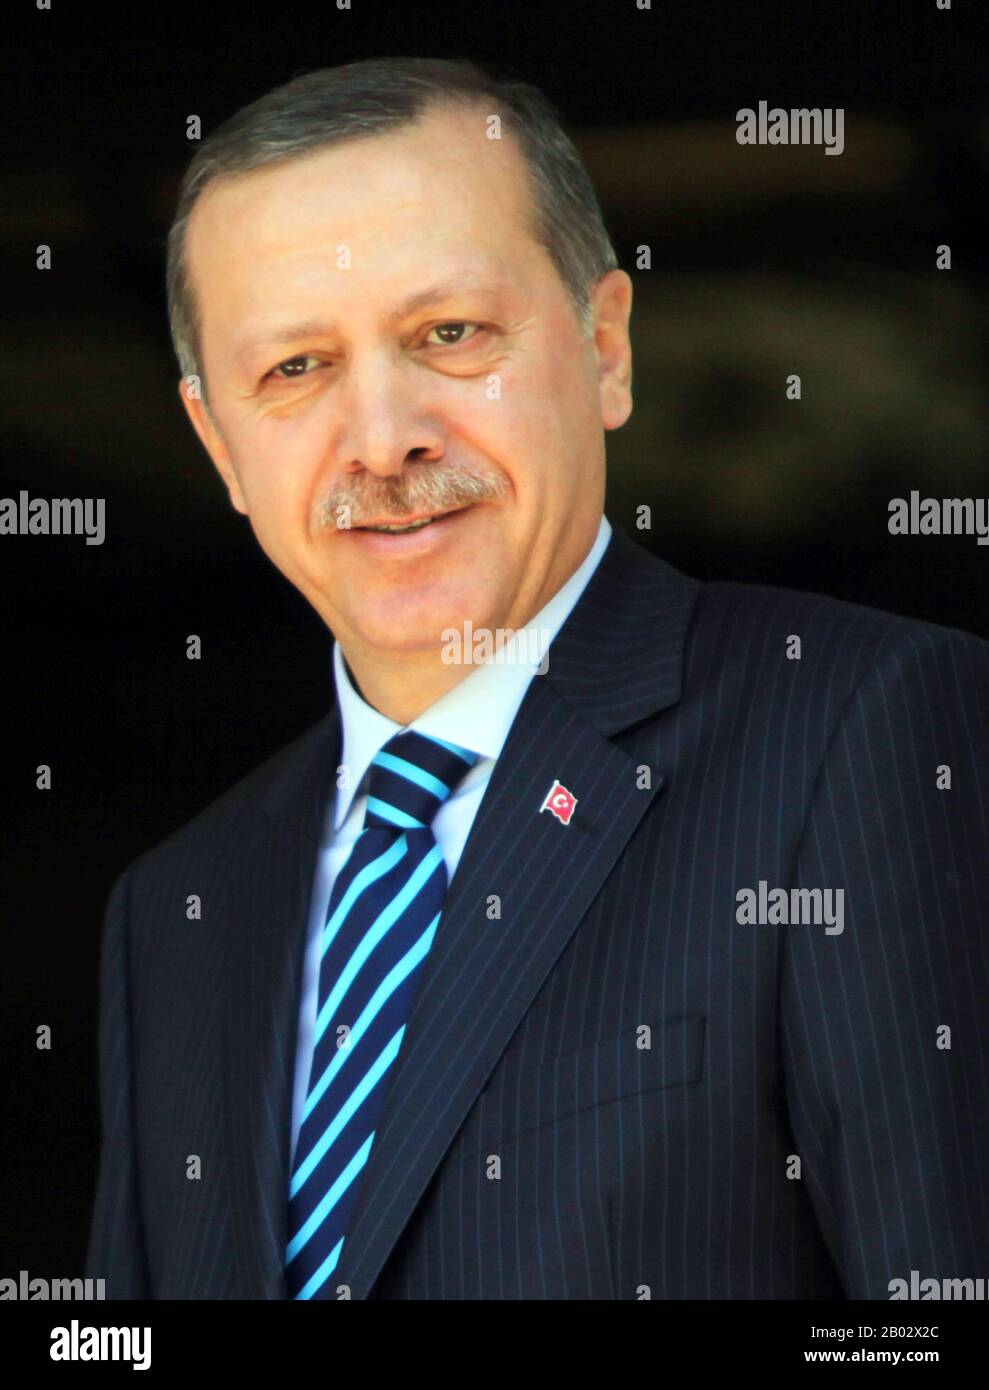 Recep Tayyip Erdogan (born 26 February 1954) is the 12th and current President of Turkey, in office since 2014. He previously served as the Prime Minister of Turkey from 2003 to 2014 and as the Mayor of Istanbul from 1994 to 1998.  Originating from an Islamic political background and claiming to be a conservative democrat, his administration has overseen liberal economic and socially conservative policies. Stock Photo